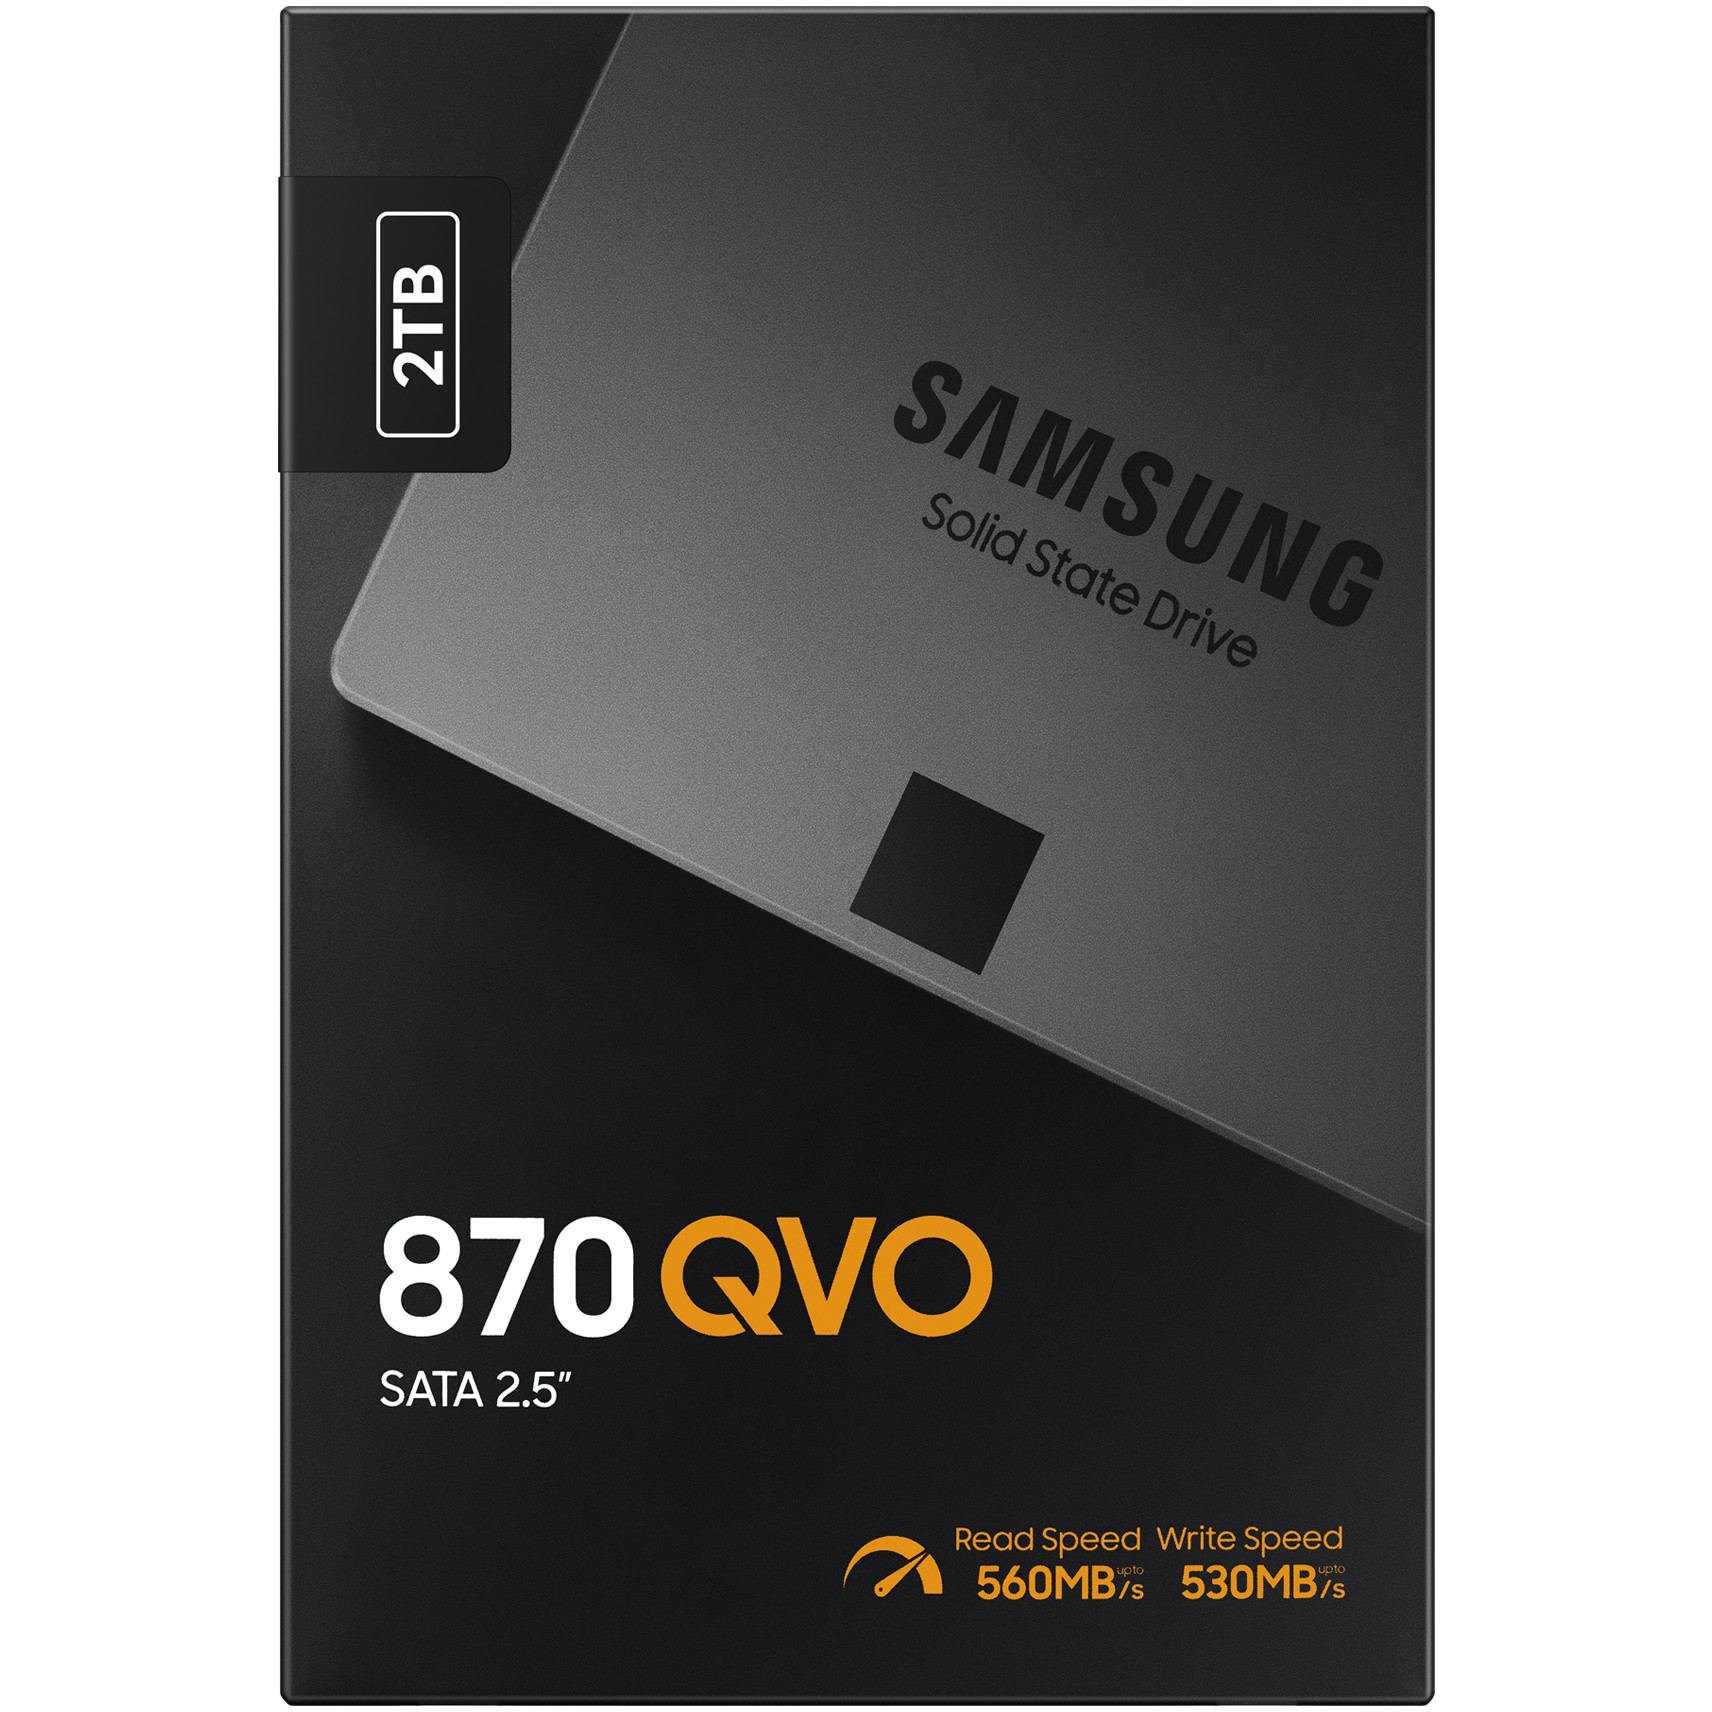 Samsung MZ-77Q2T0BW 870 QVO 2TB SSD, Read Speed up to 560 MB/s, Write Speed up to 530 MB/s